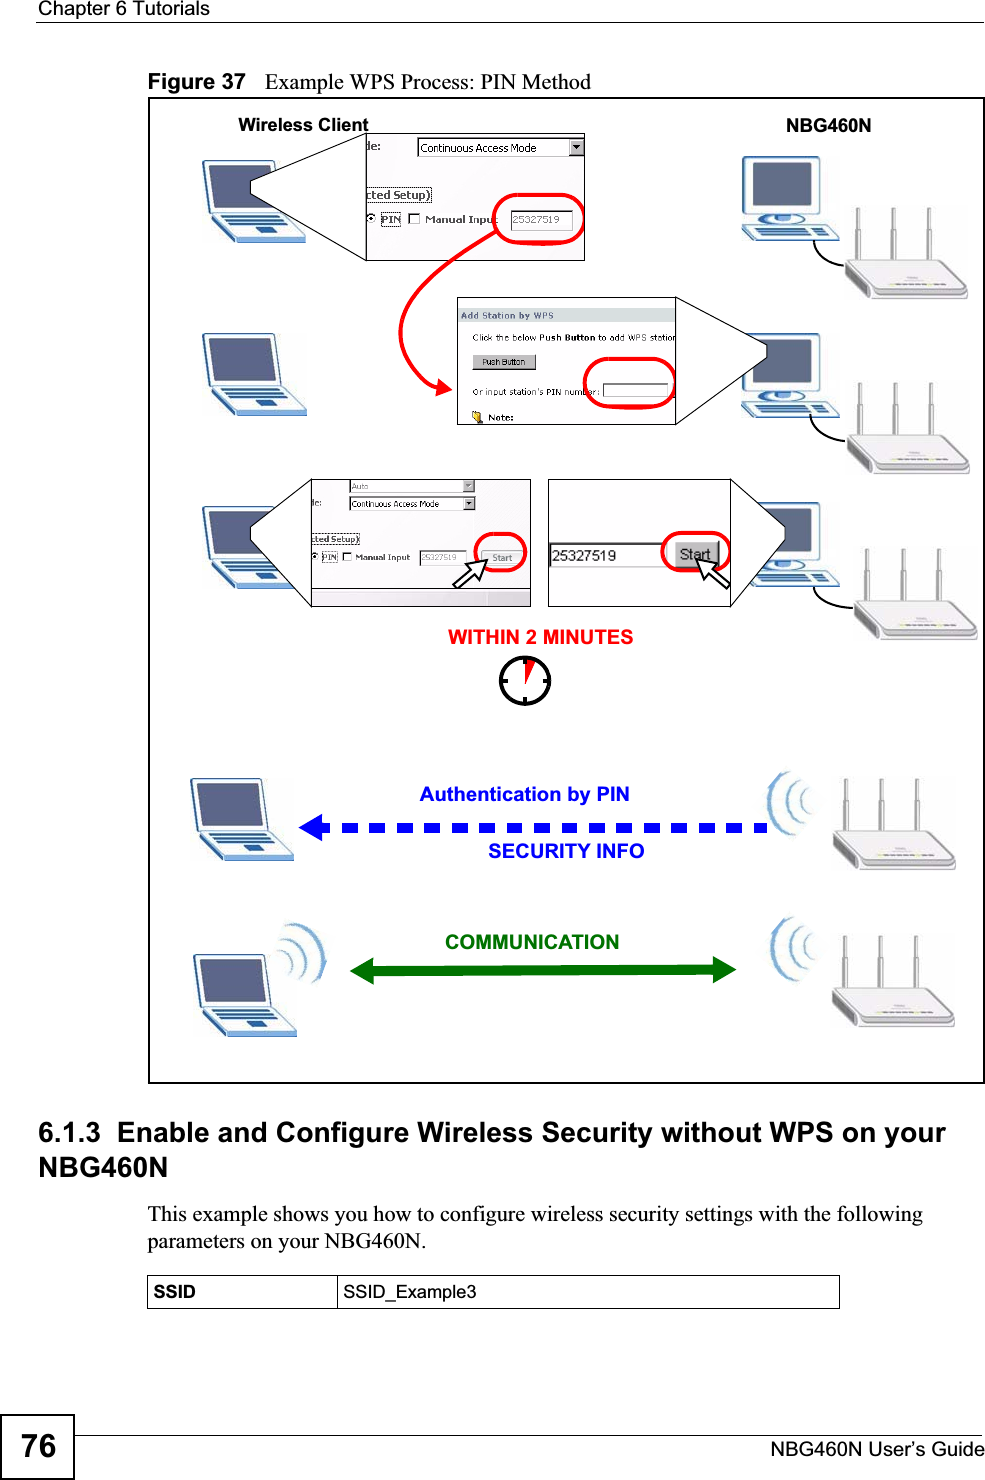 Chapter 6 TutorialsNBG460N User’s Guide76Figure 37   Example WPS Process: PIN Method6.1.3  Enable and Configure Wireless Security without WPS on your NBG460NThis example shows you how to configure wireless security settings with the following parameters on your NBG460N.Authentication by PINSECURITY INFOWITHIN 2 MINUTESWireless ClientNBG460NCOMMUNICATIONSSID SSID_Example3